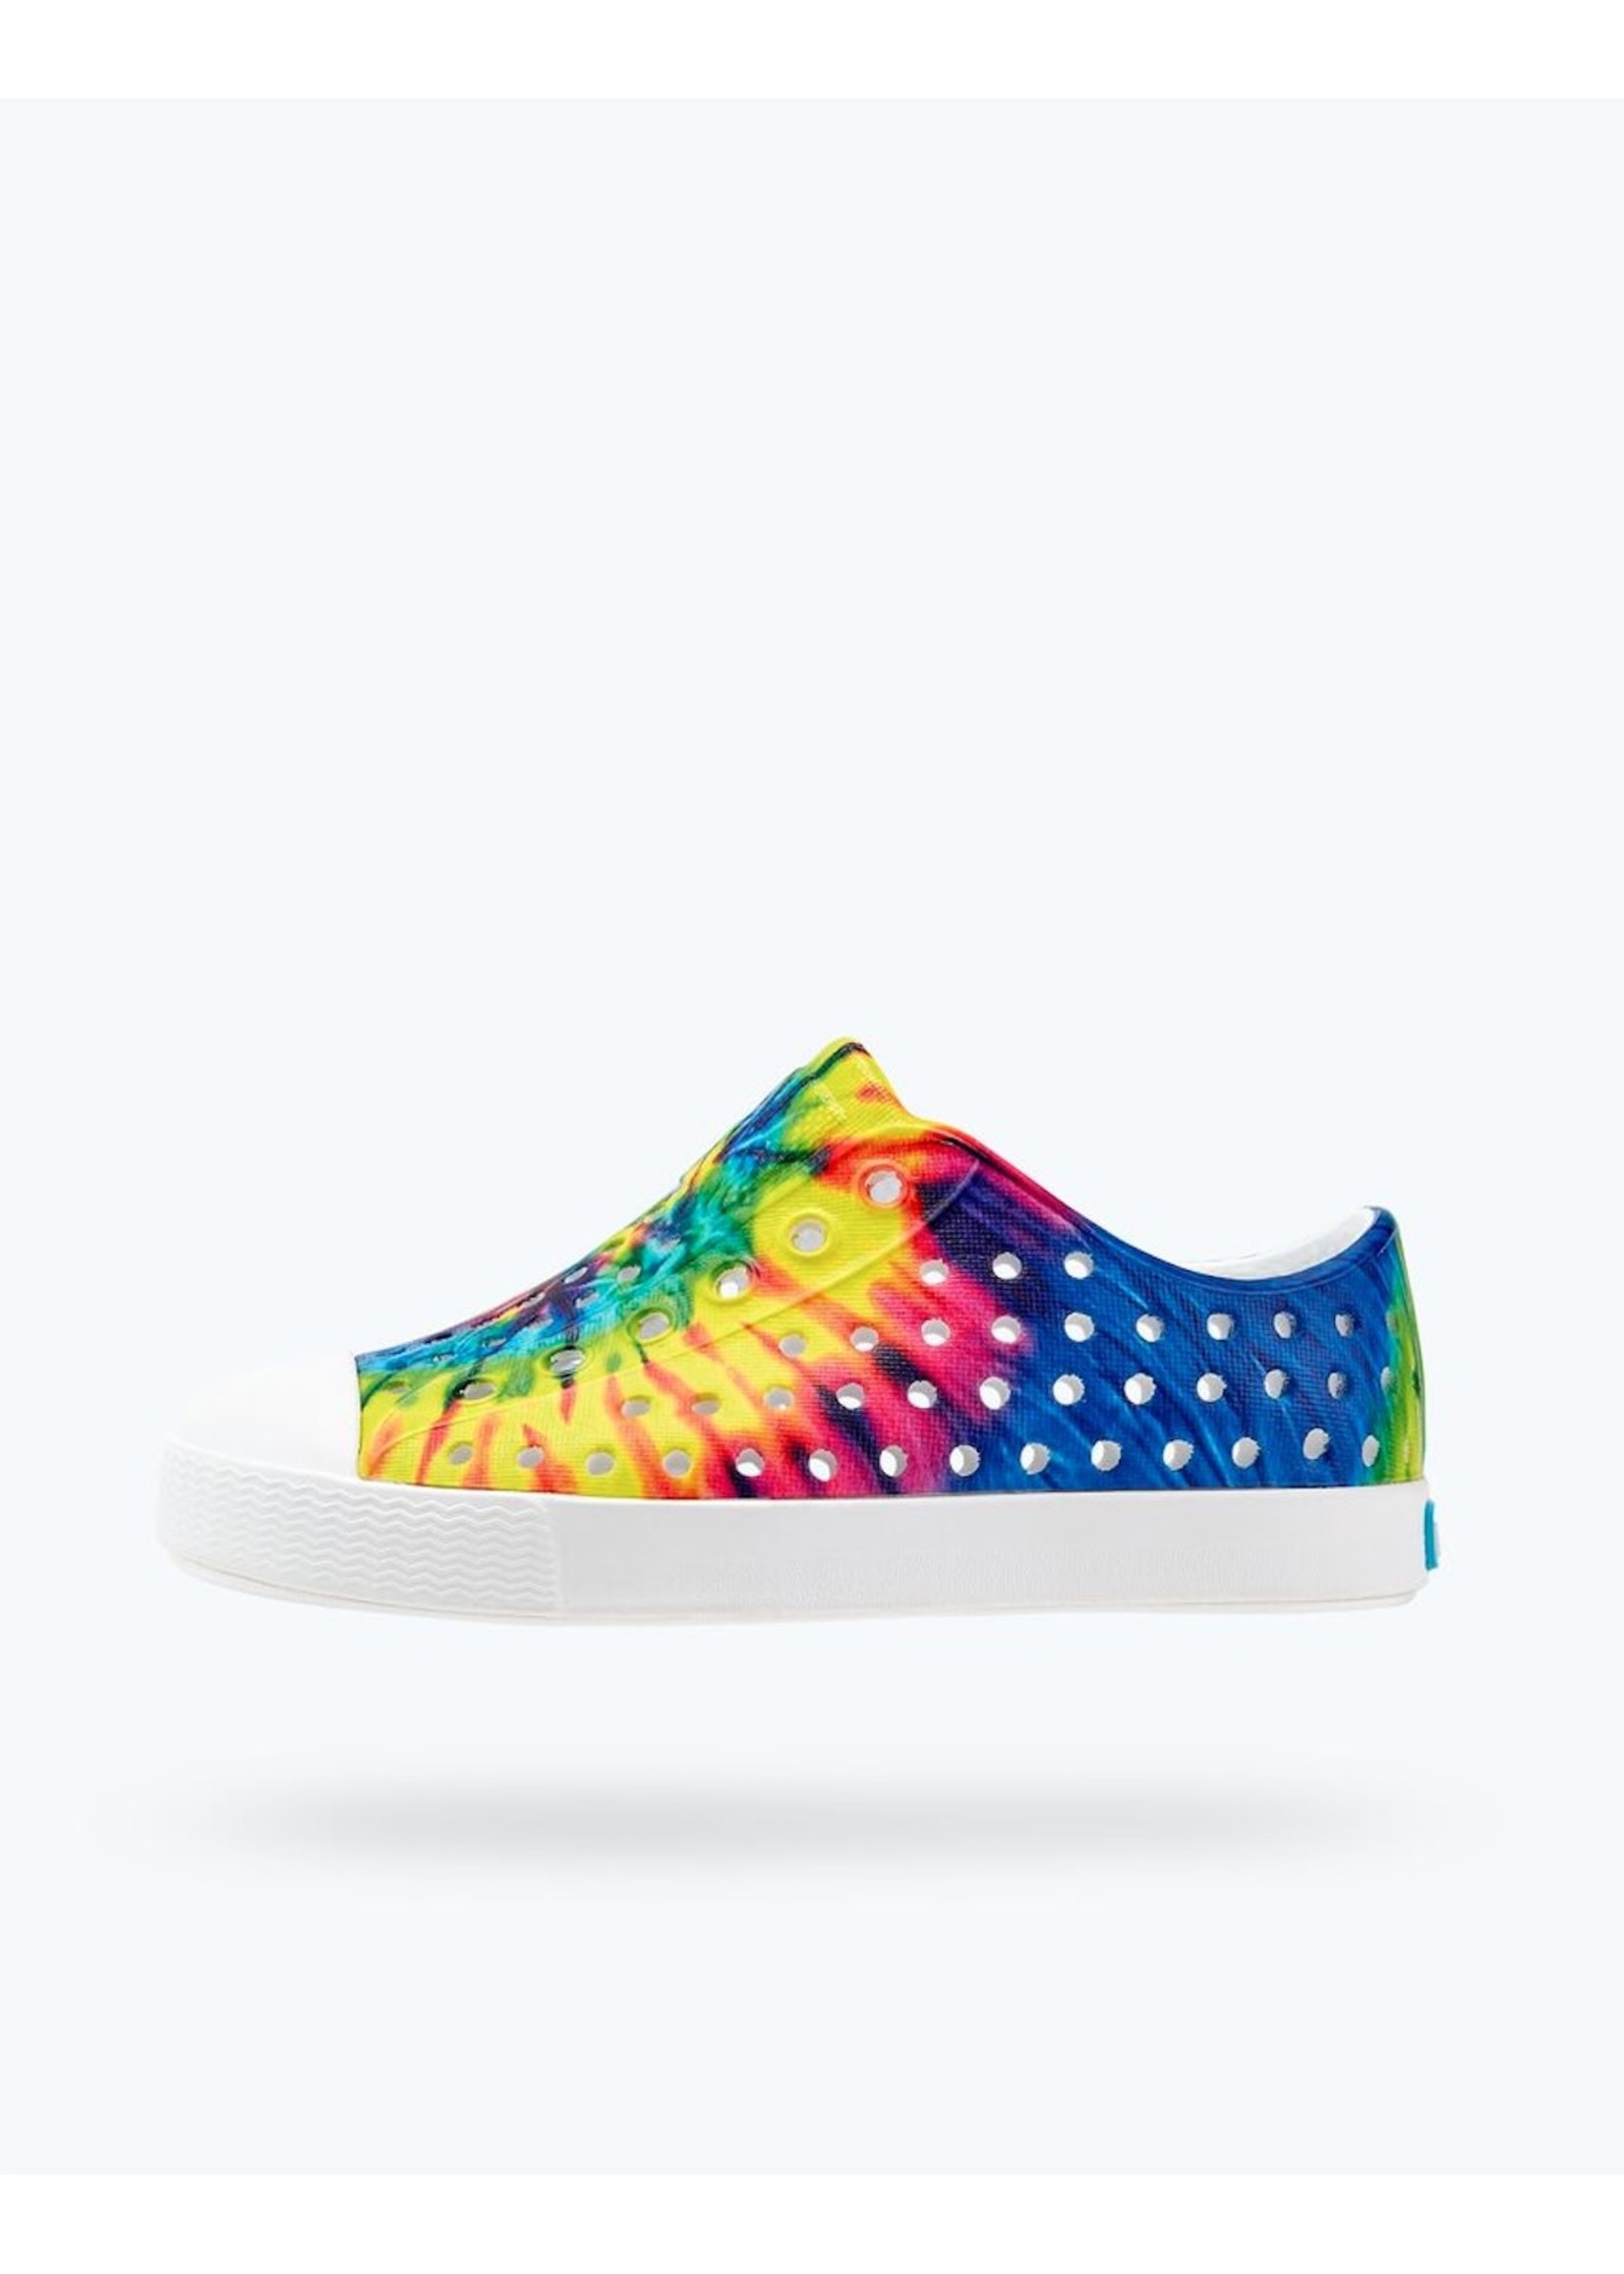 Native Shoes Native Shoes, Jefferson Youth / Junior in  Neon Multi Tie Dye Print